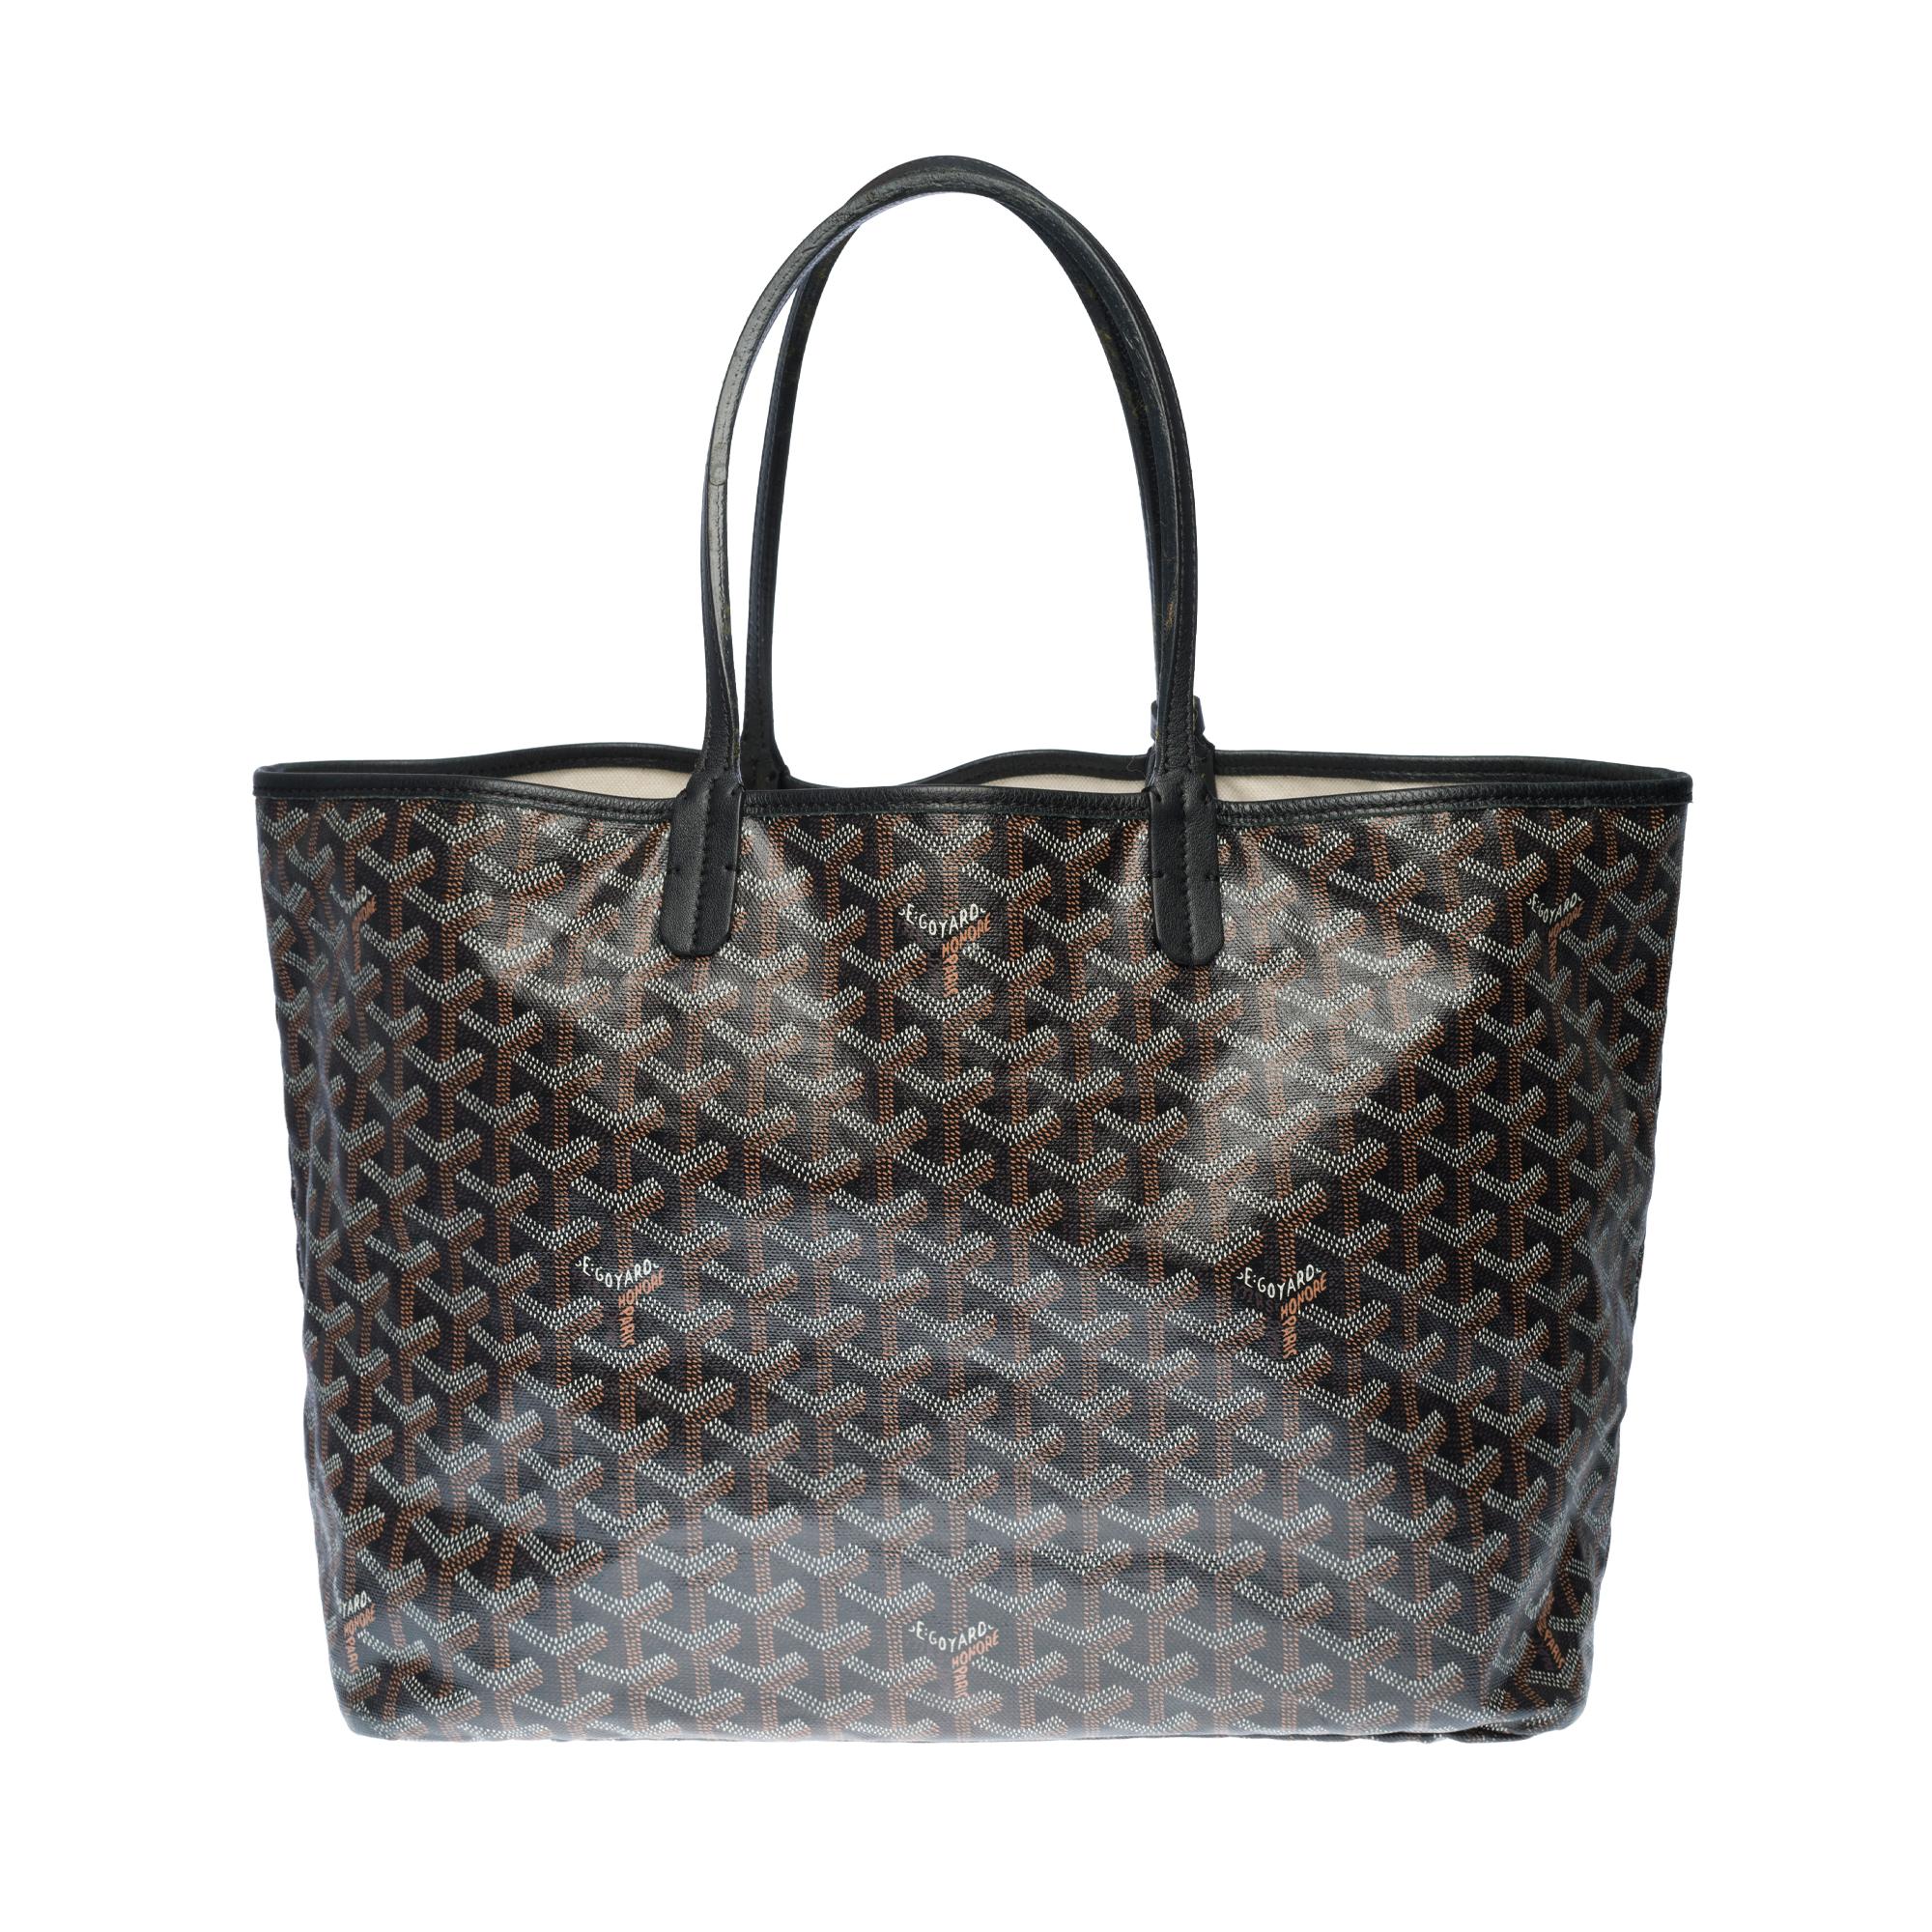 The iconic Goyard Saint-Louis Tote bag in black Goyardine canvas and black leather, silver metal hardware, double handle in black leather allowing a hand or shoulder support.

Lining in white canvas, 1 removable pouch.
Signature: 